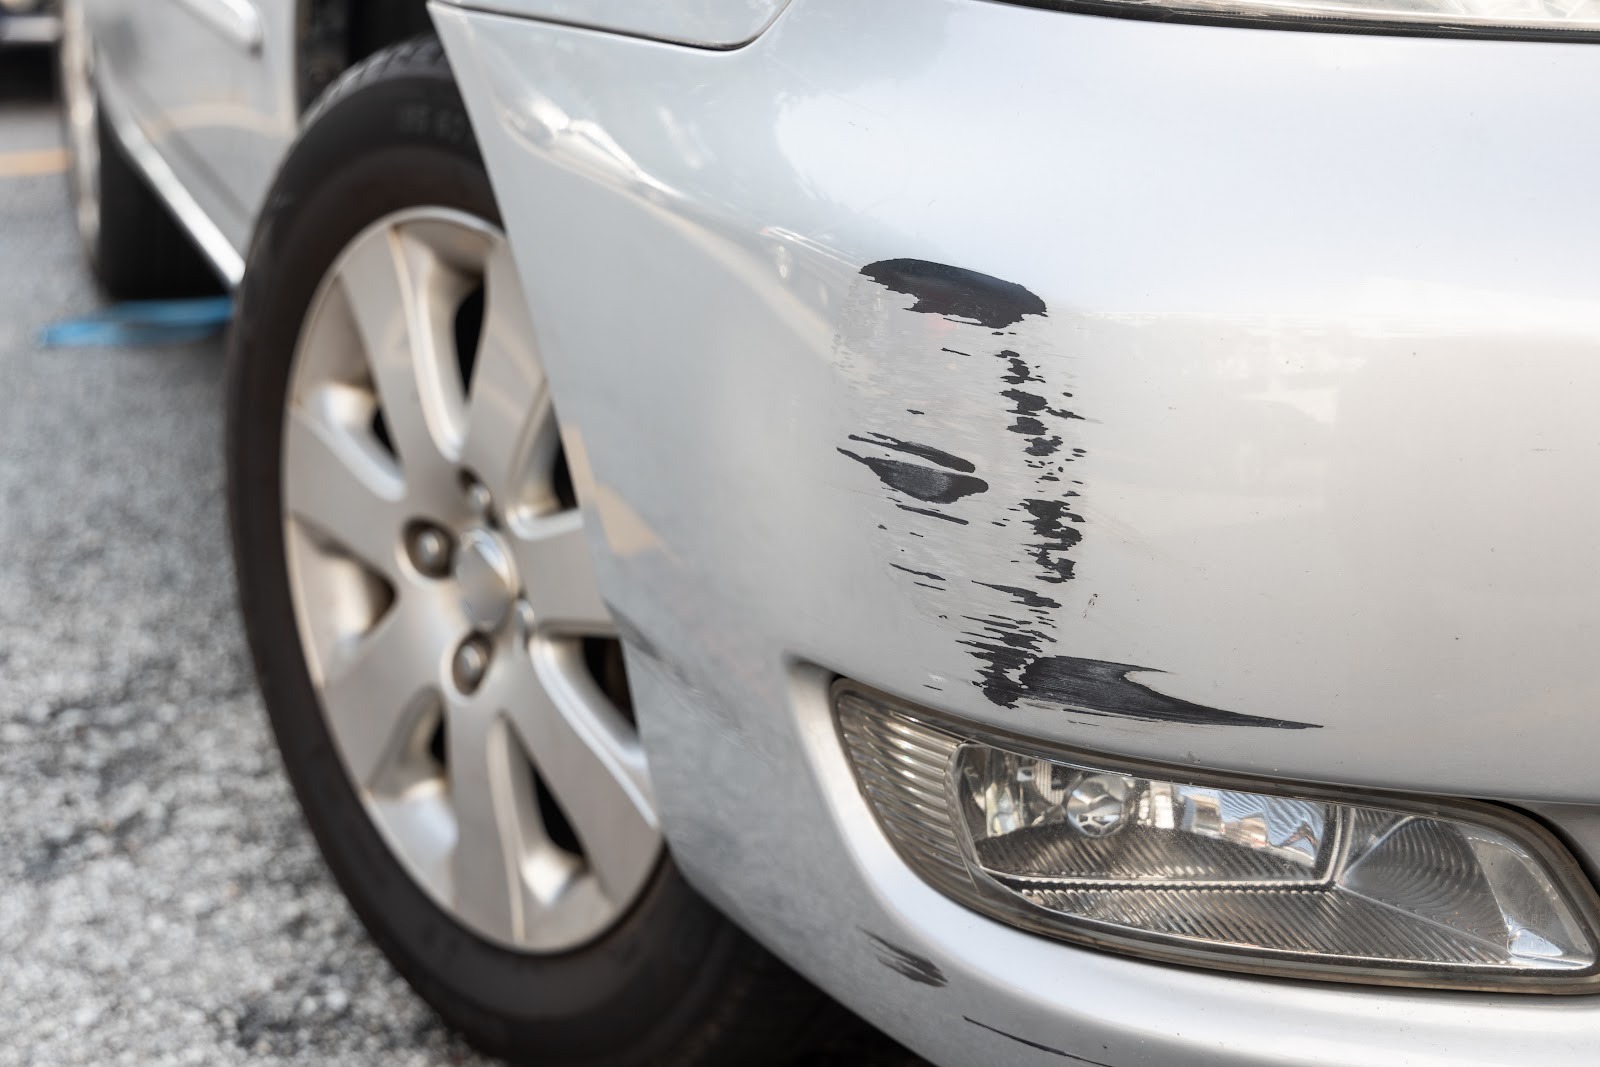 how to fix scratches on car, car maintenance tips, types of car scratches : how to fix scratches on car?